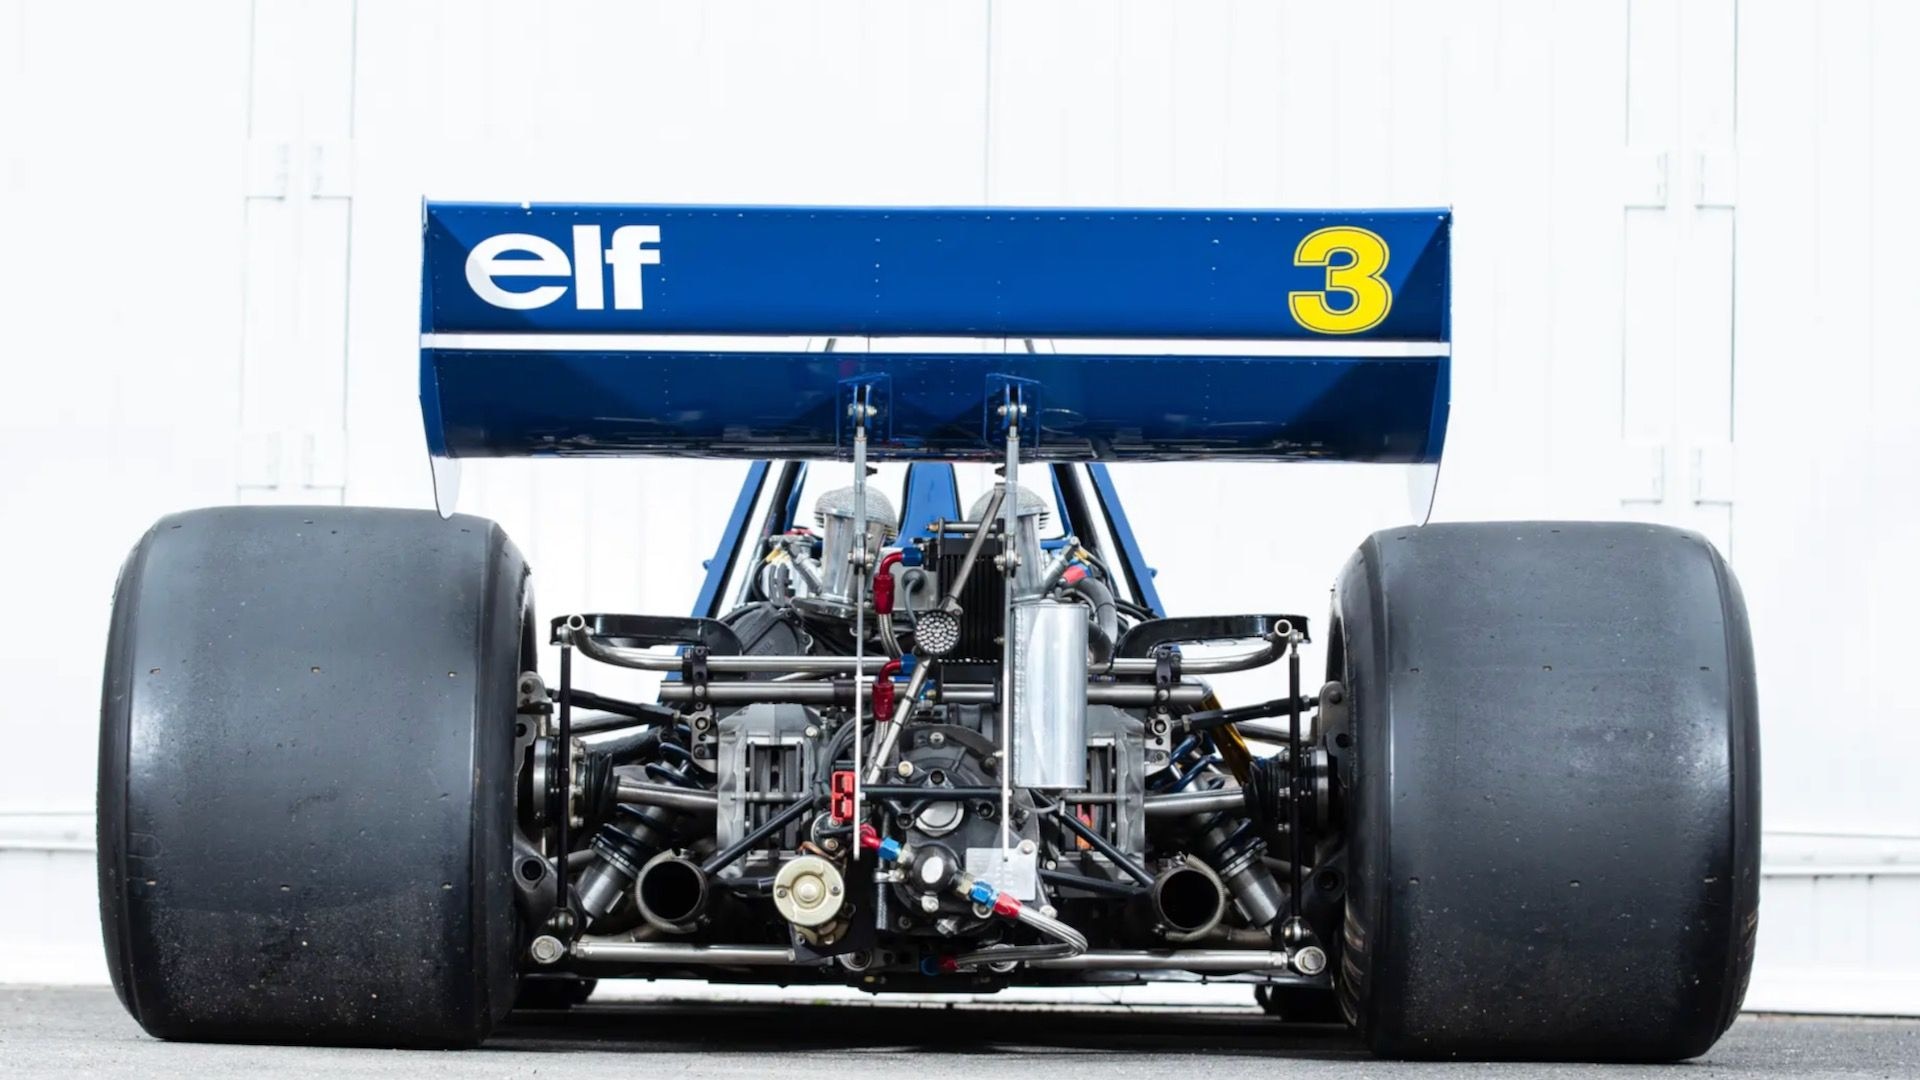 1977 Tyrrell P34, chassis number 8 (photo via RM Sotheby's)